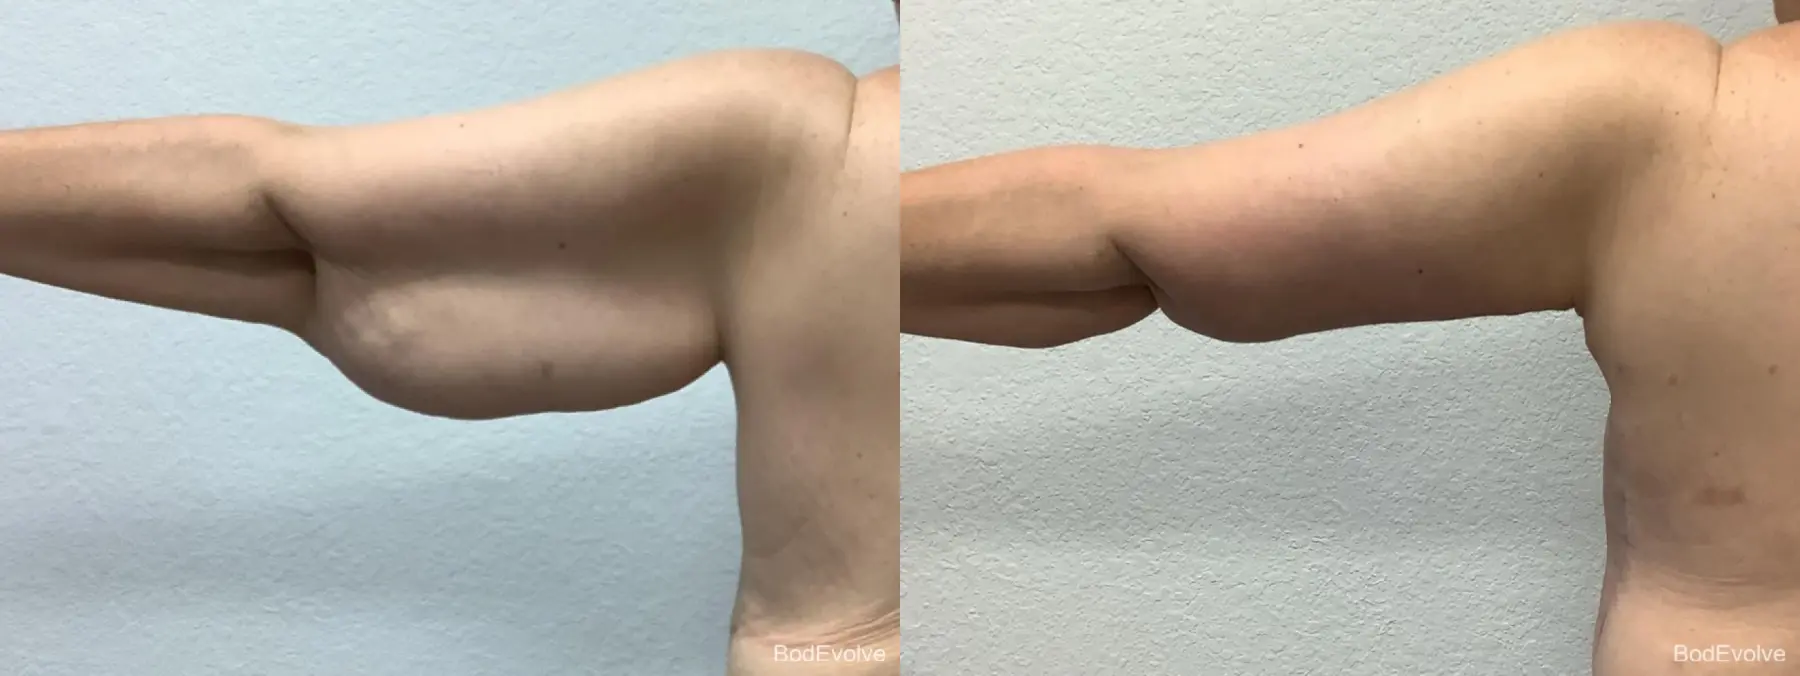 Arm Lift: Patient 1 - Before and After 7